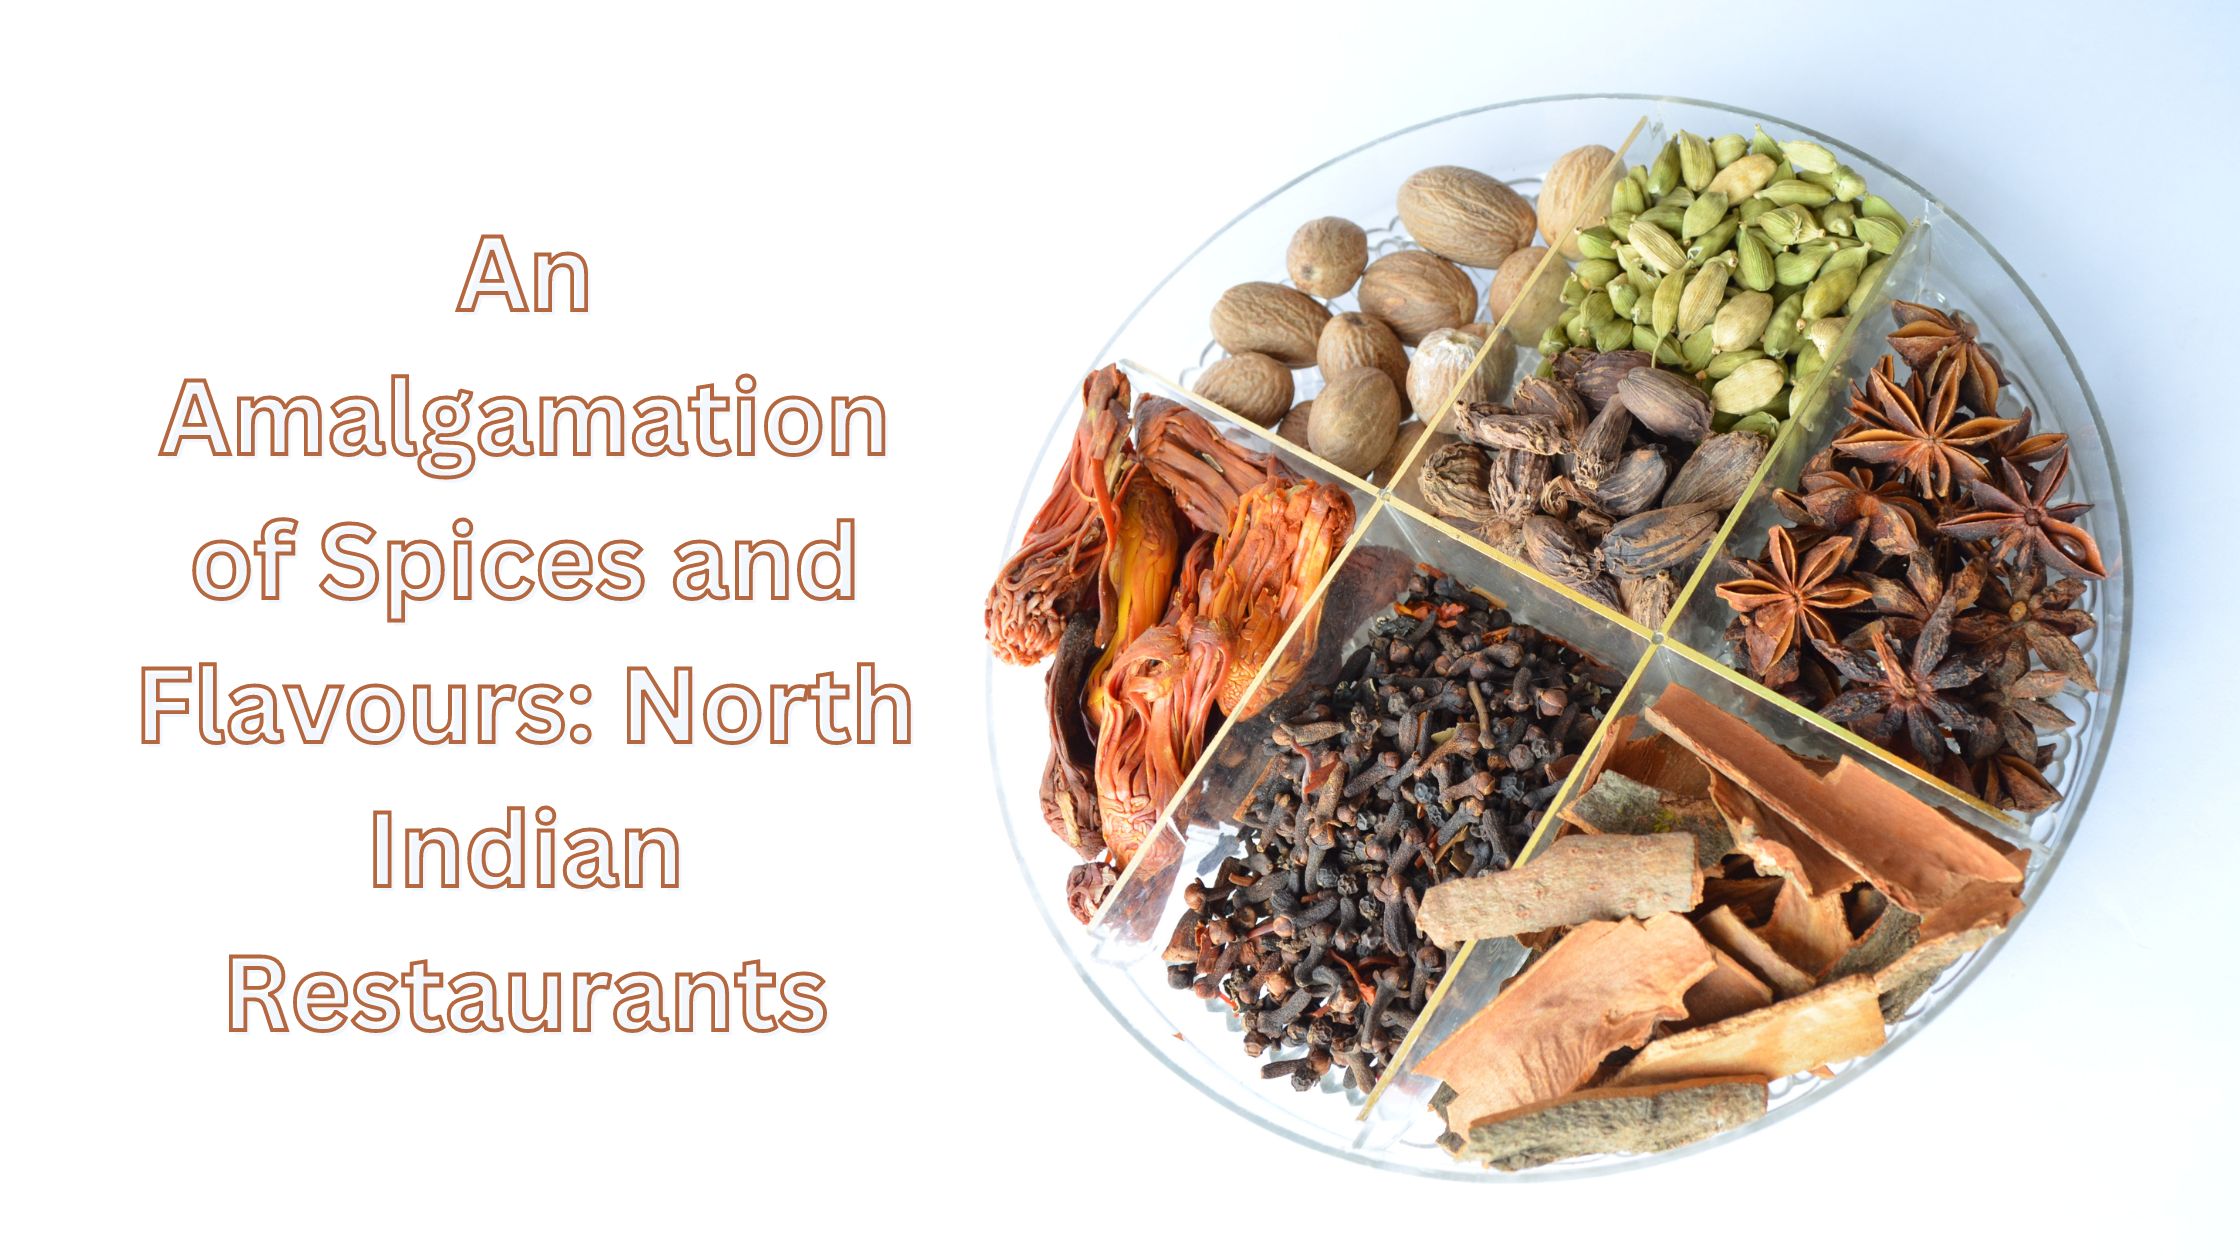 An Amalgamation of Spices and Flavours North Indian Restaurants